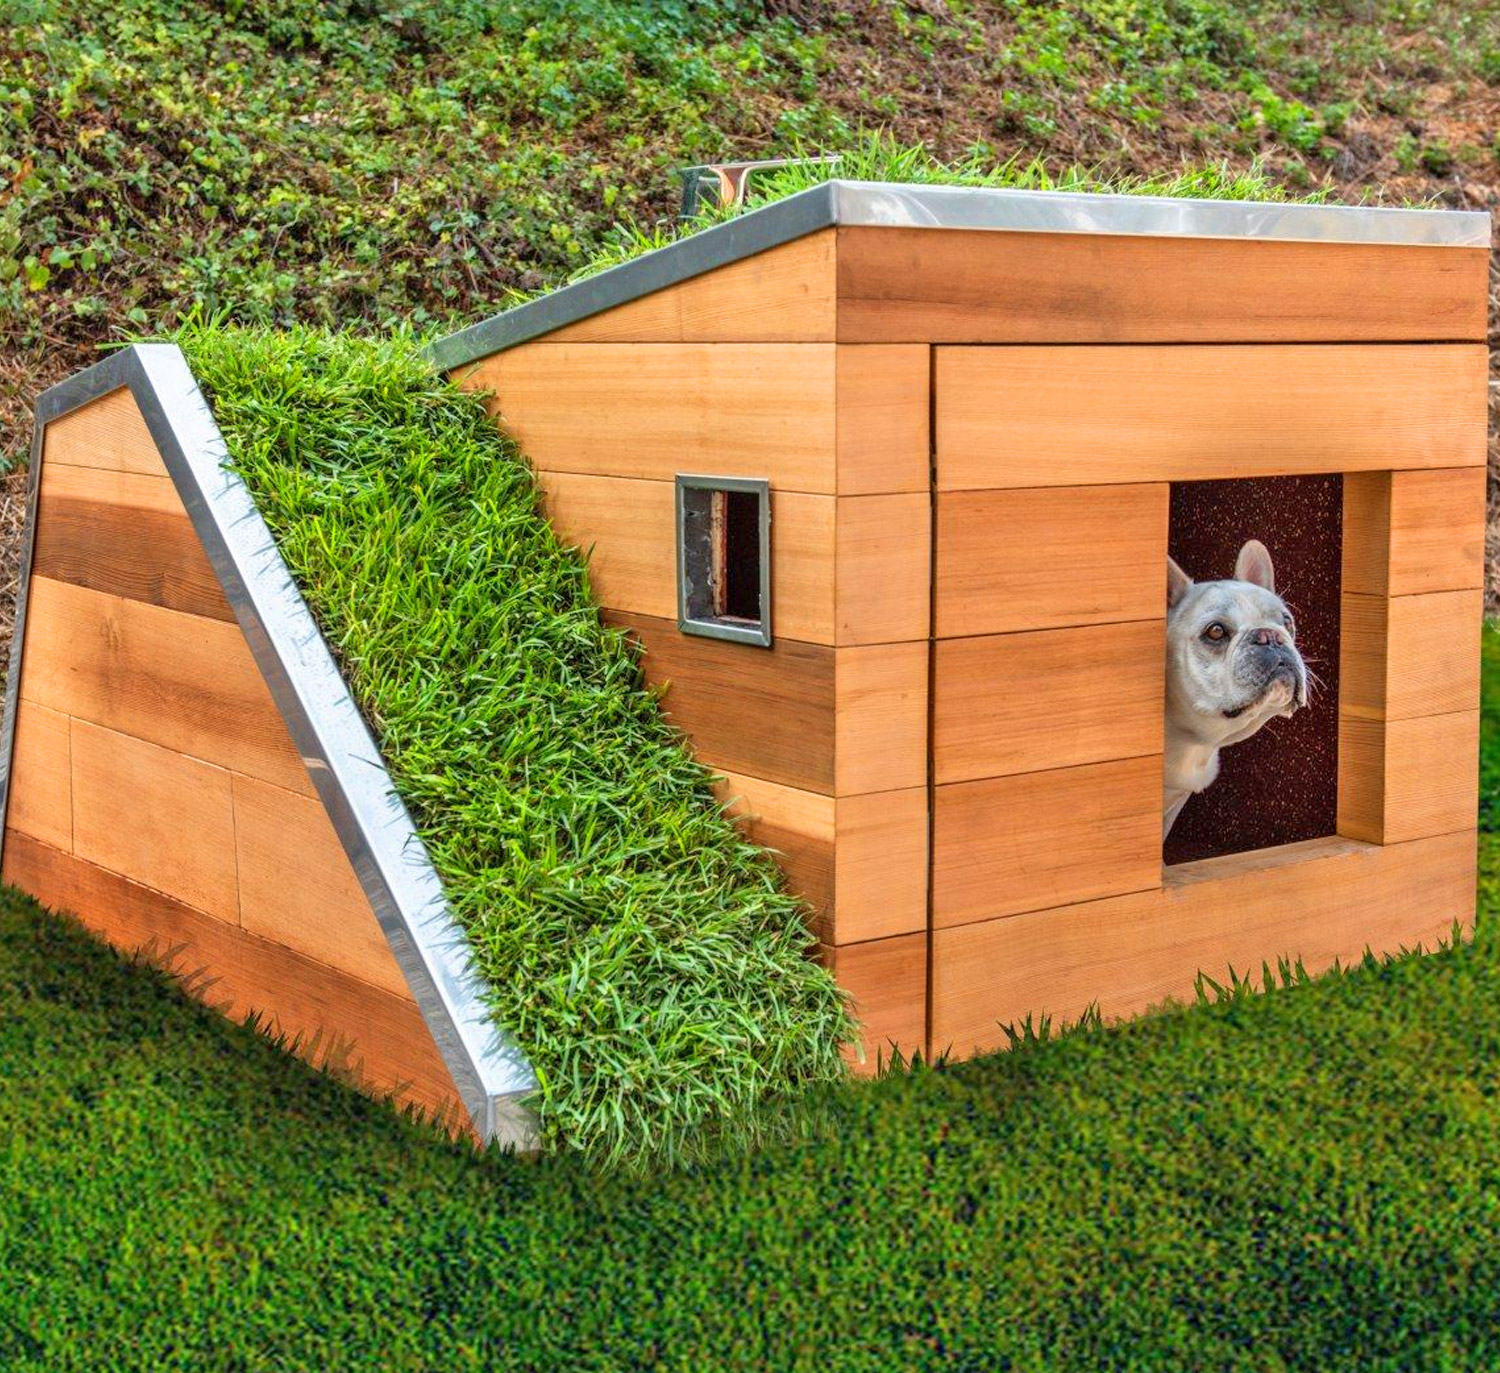 this-modern-dog-house-is-made-with-grass-and-an-automatic-water-faucet-0.jpg